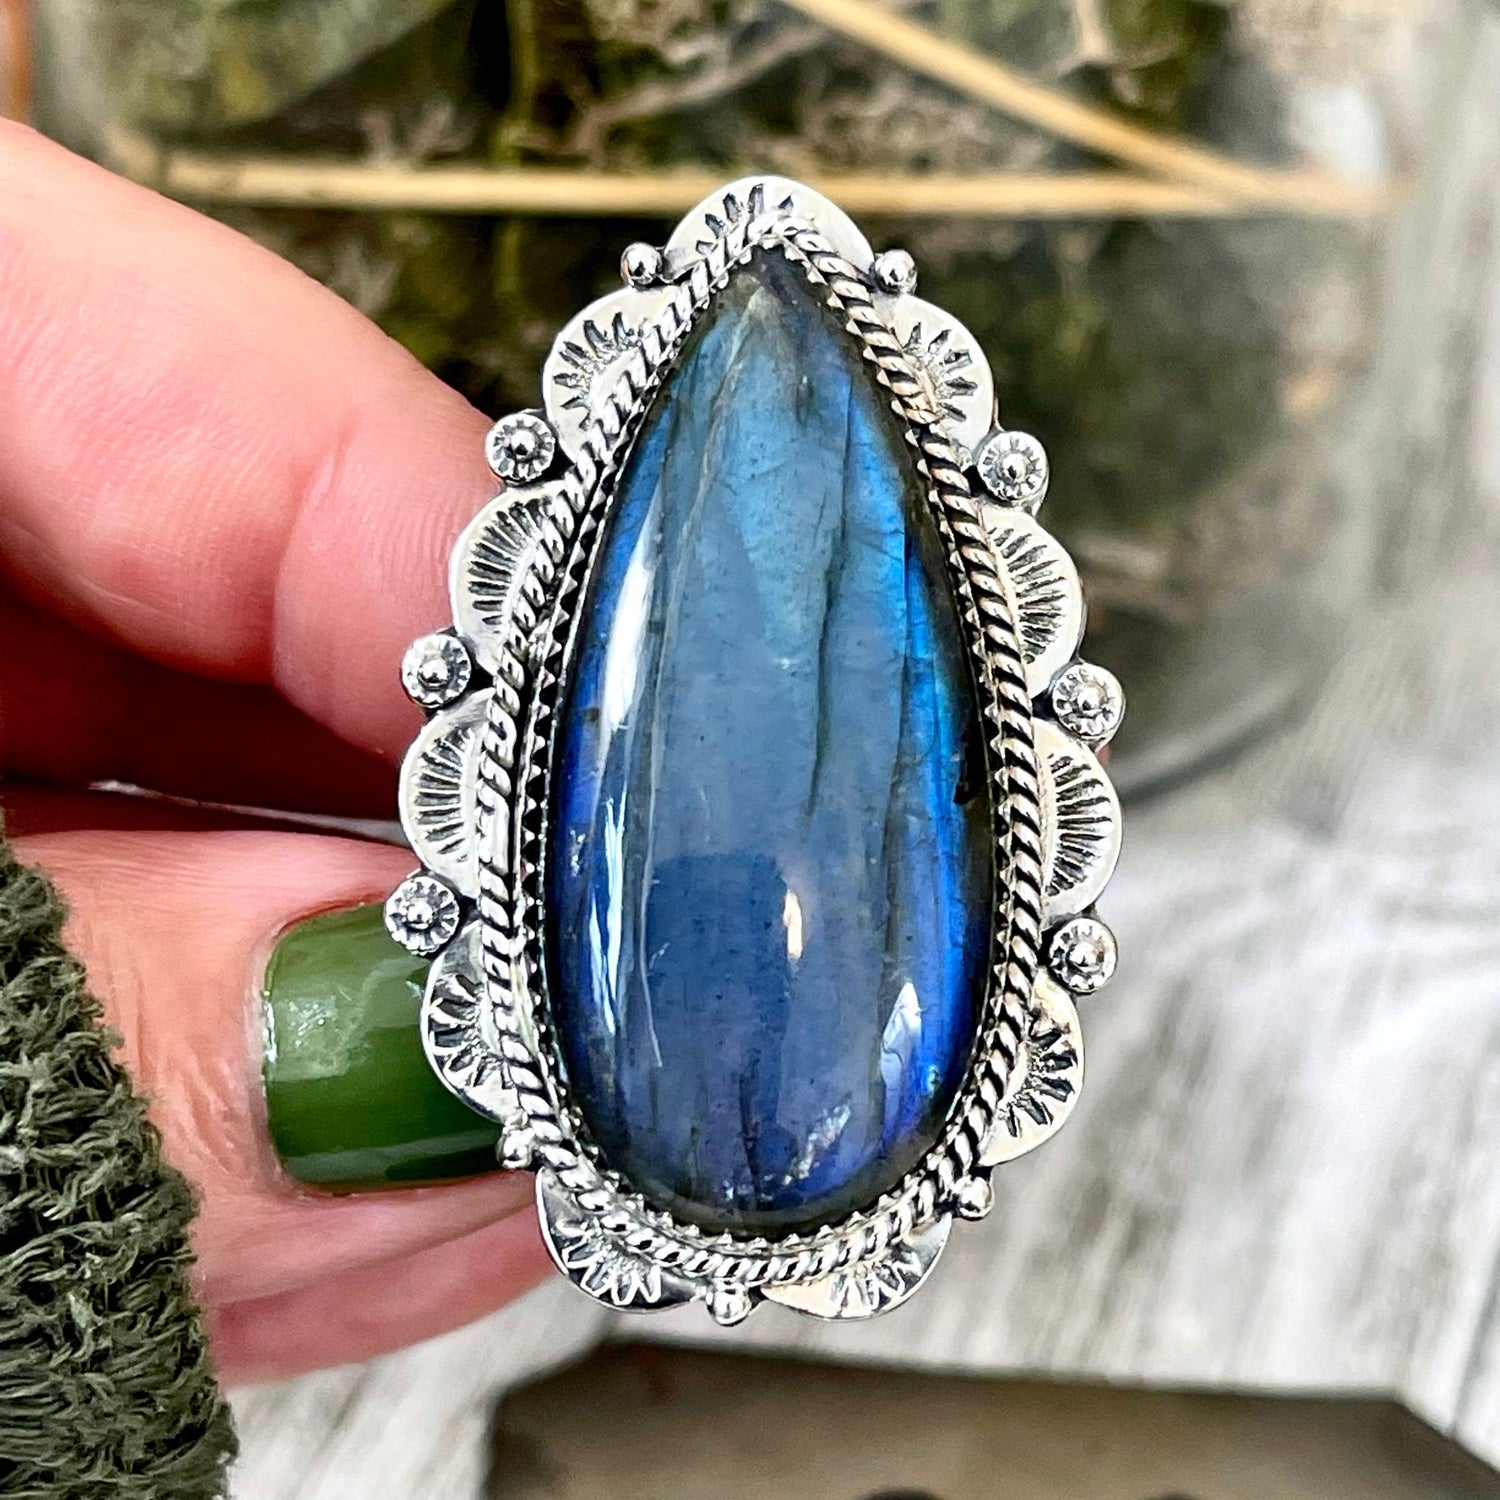 Labradorite Teardrop Crystal Statement Ring in Sterling Silver- Adjustable- Designed by FOXLARK Collection Adjusts to Size 6,7,8,9, or 10